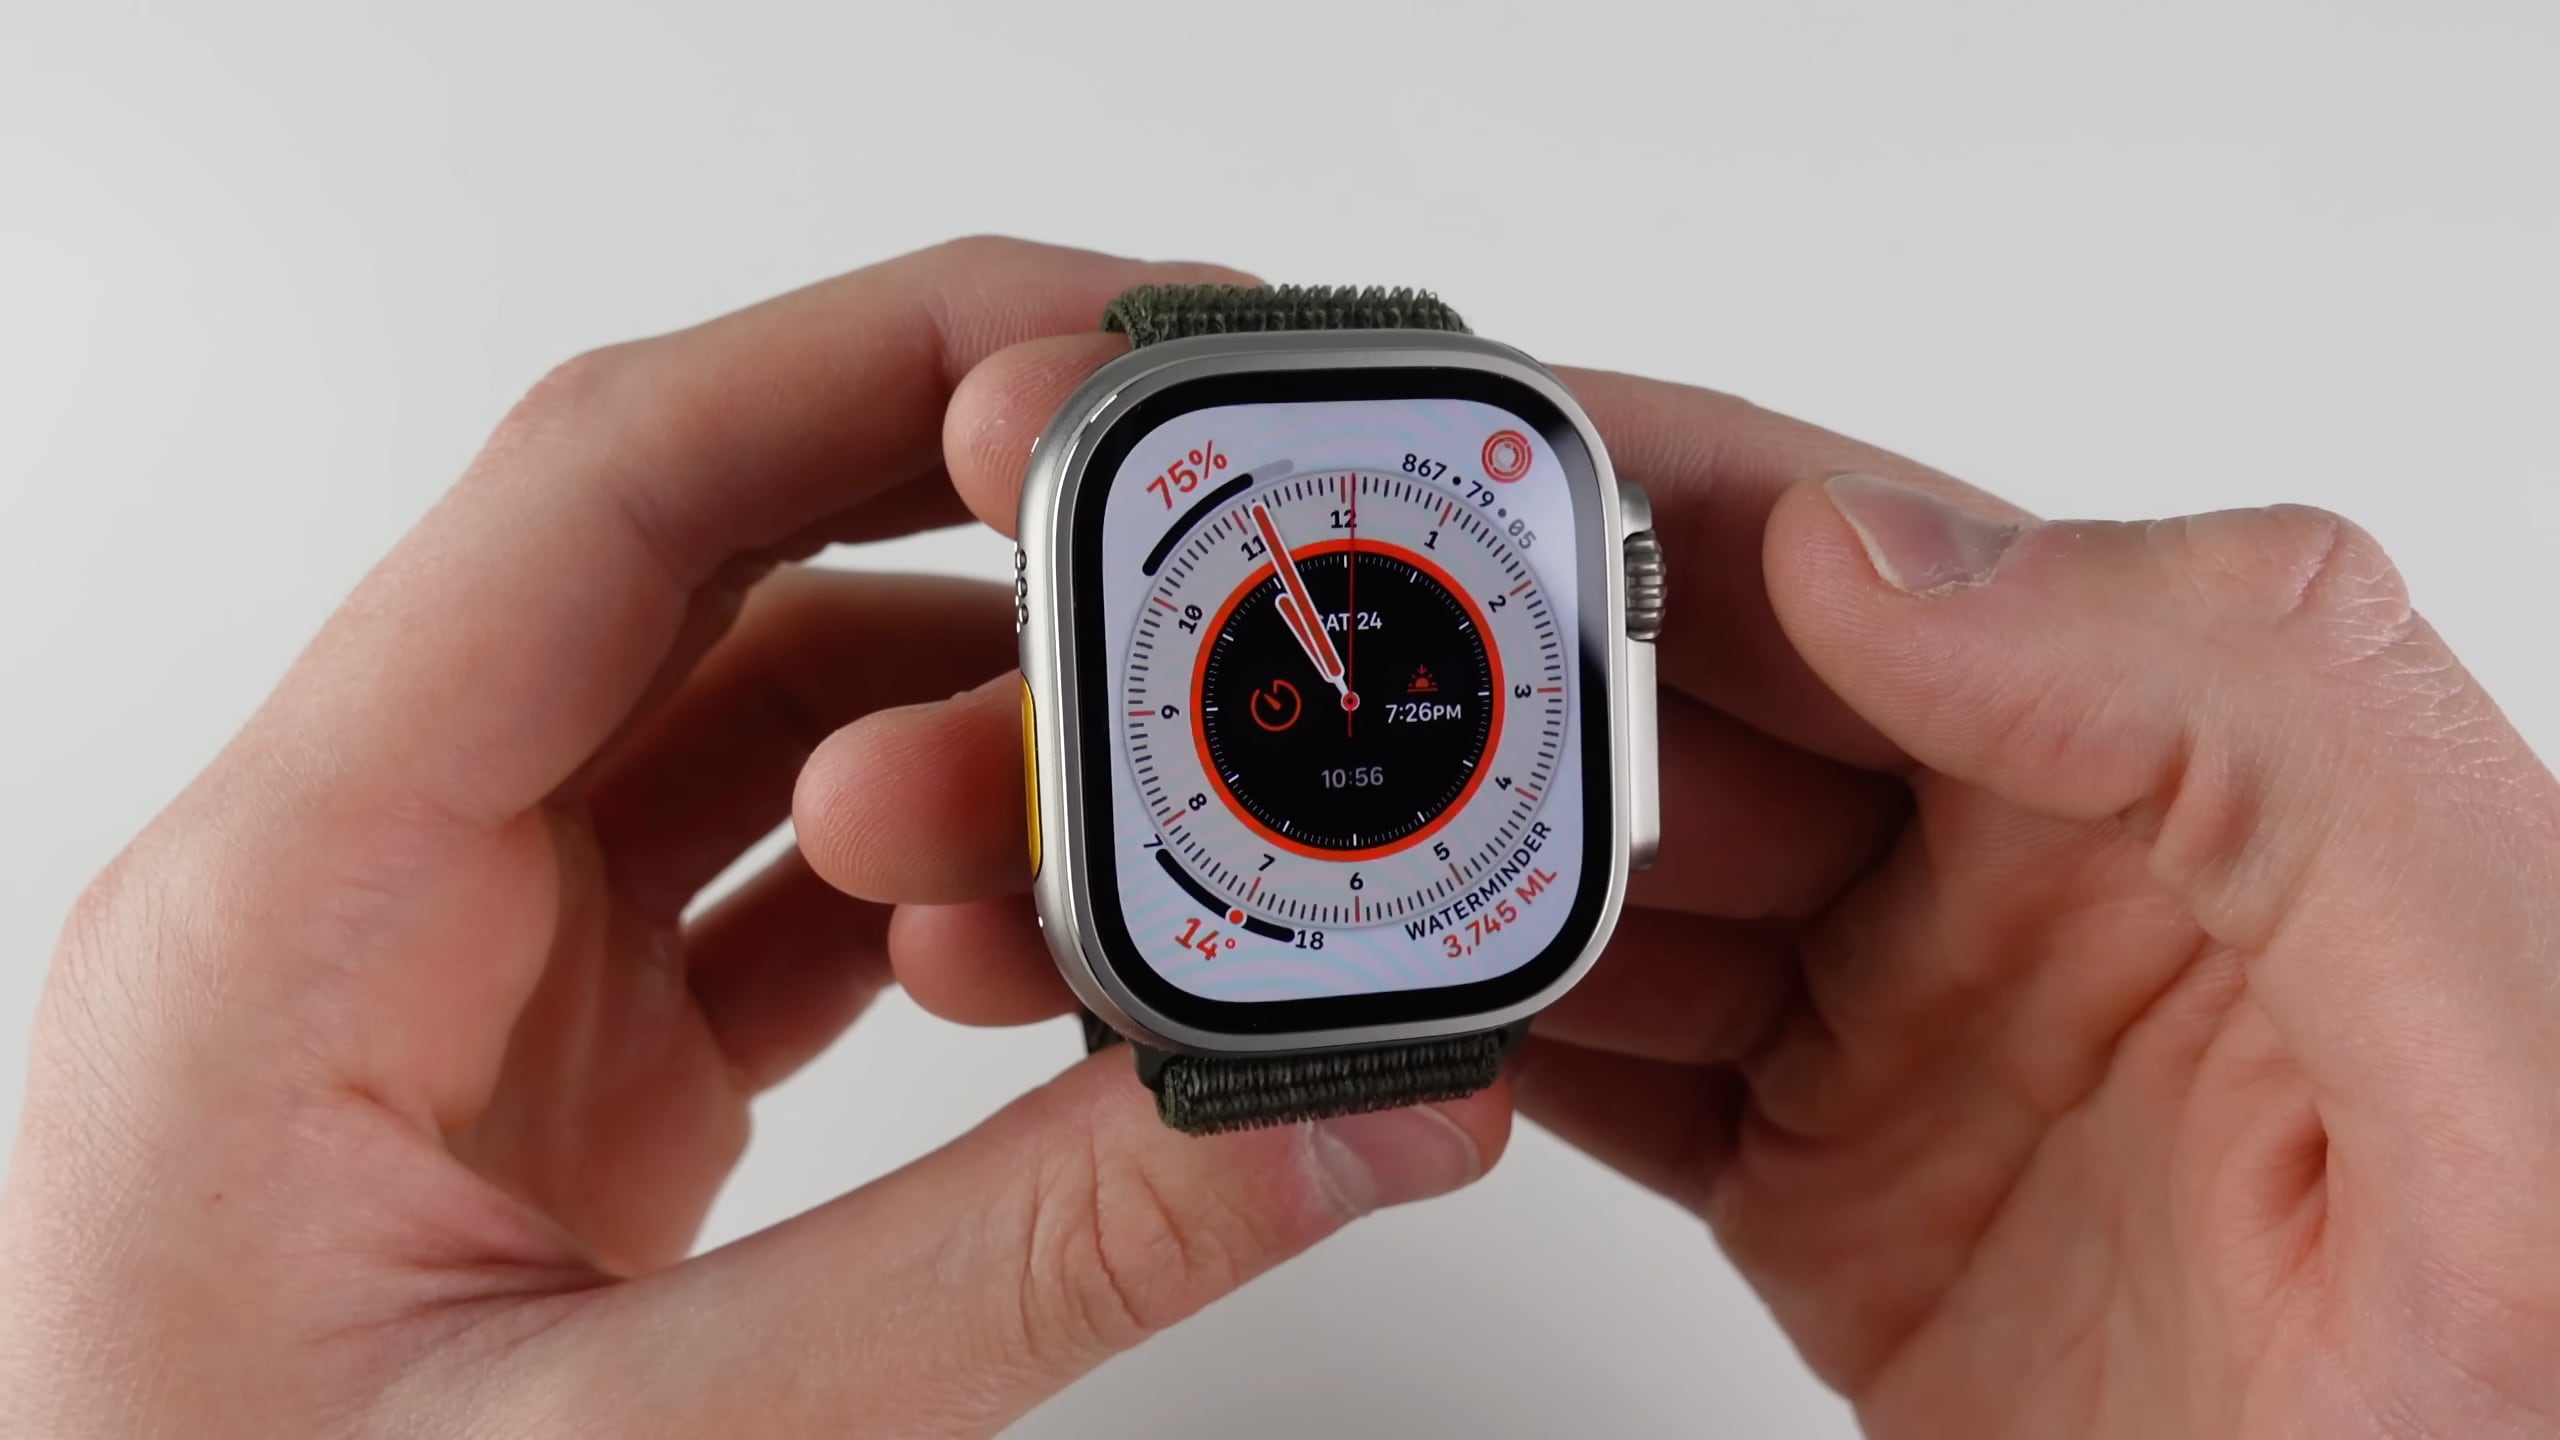 Apple rumored to redesign core apps in watchOS 10 for larger watch displays